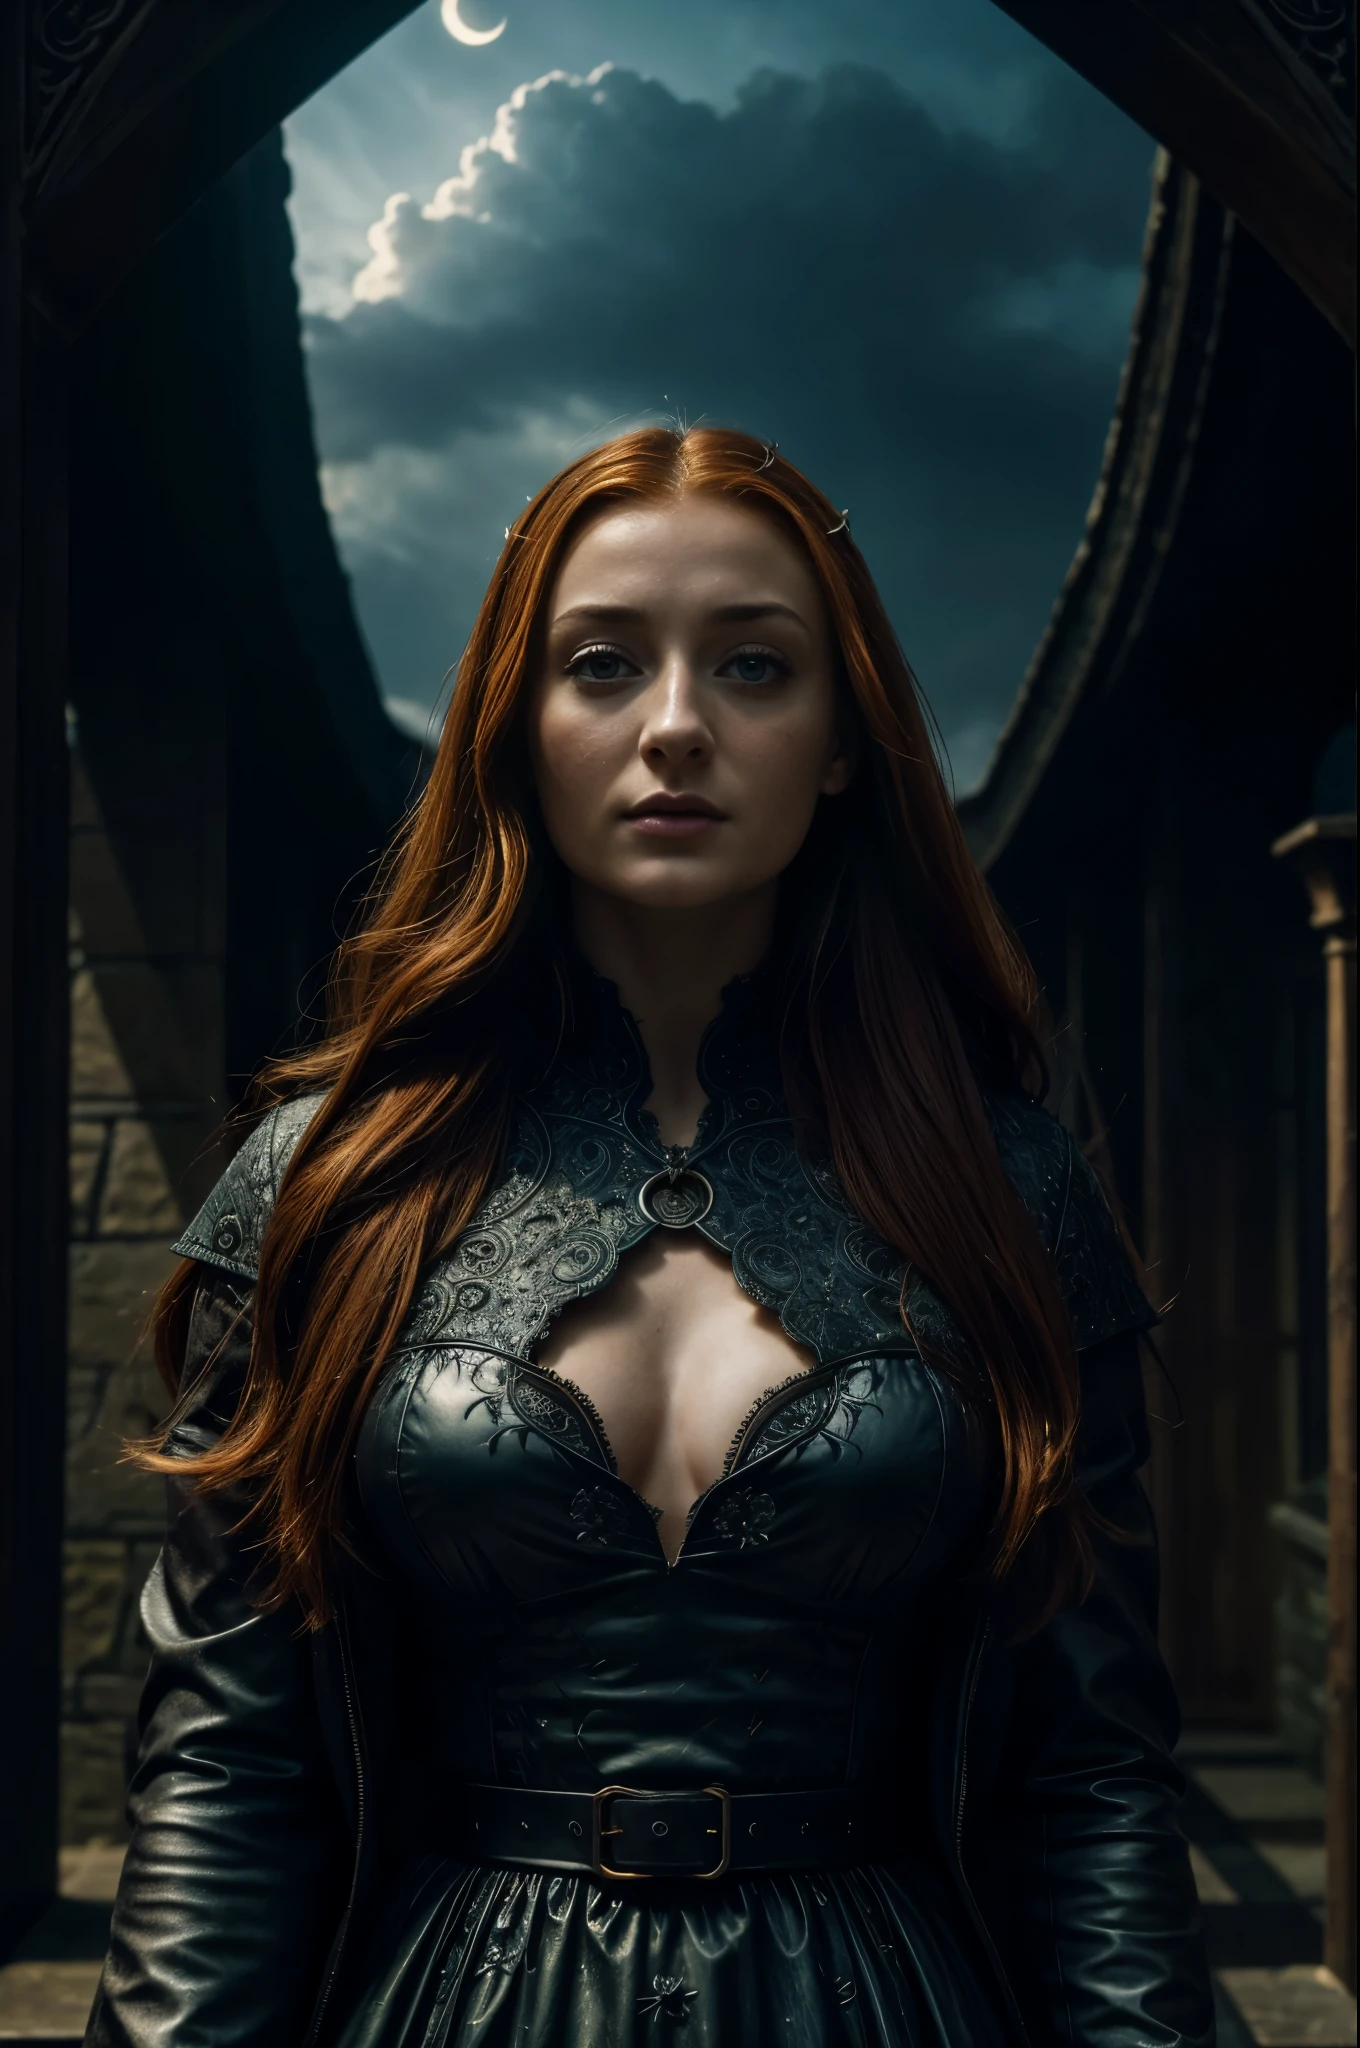 Sansa Stark, Looks like Sophie Turner, Sansa Stark played by Sophie Turner, thick body, photo of beautiful 35 y.o woman, 4k uhd, high quality, dramatic, cinematic, (freckles:0.8), imaginary floral patterns cumulus, a heavy mist of fragrance, noticeable, the bird seed in her hands, growing into birds, giants shelter her body, intricate ornate structures, cumulus cloud survival float around her, radiating, the night sky, deep dark shadows, she hides new seasons, the woman is aware and watching us, we see her energy